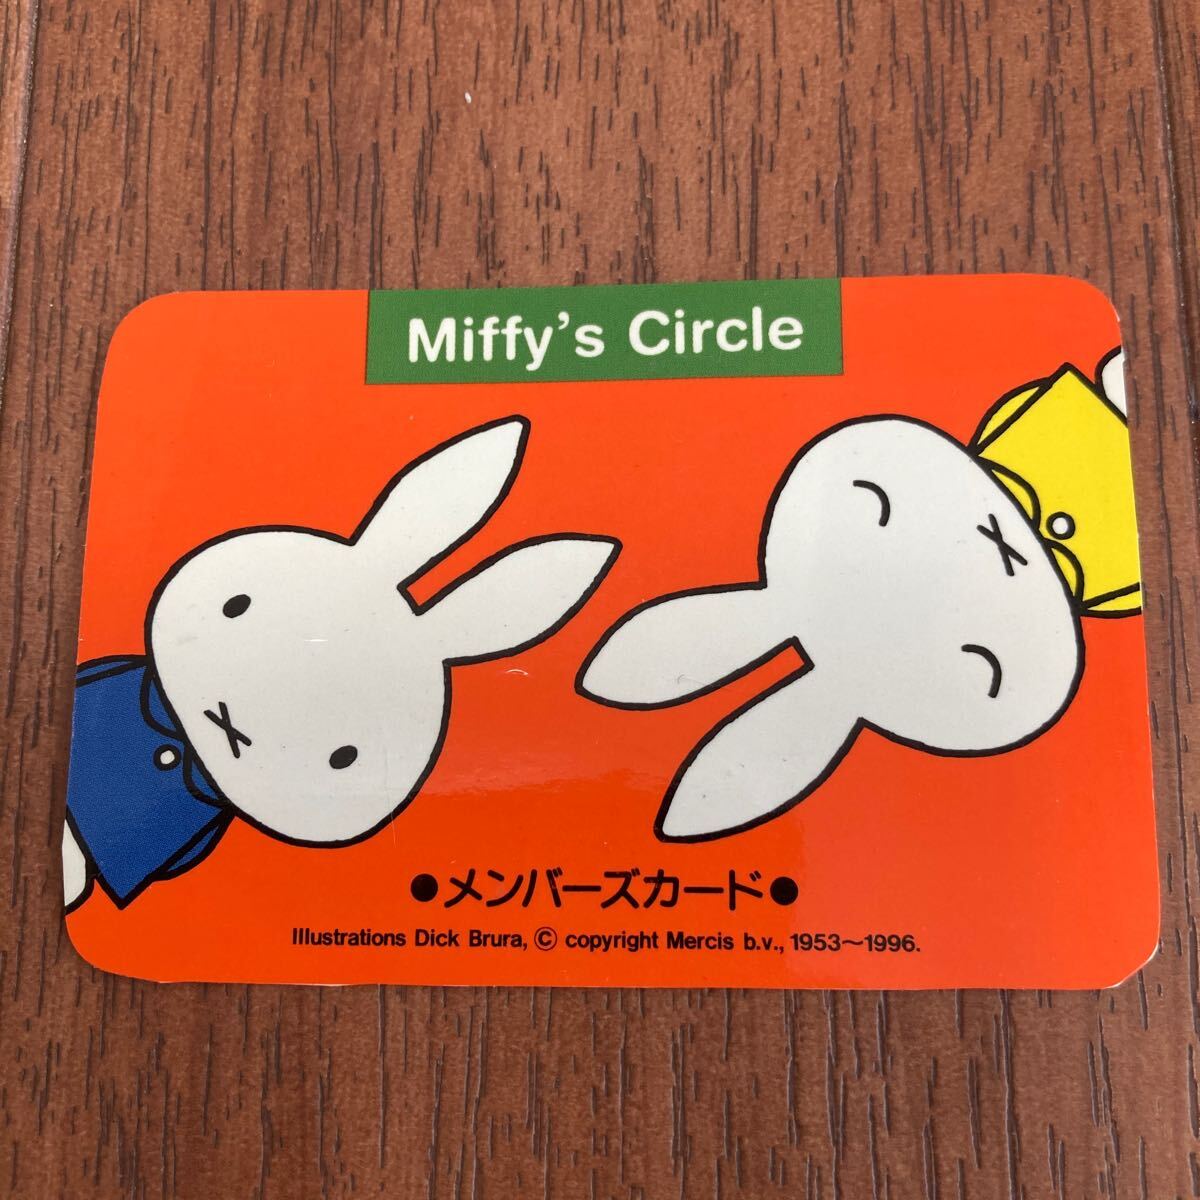  Ferrie simo Miffy Circle card-case & member z card Dick bruna pass case fixed period ticket inserting Myffy